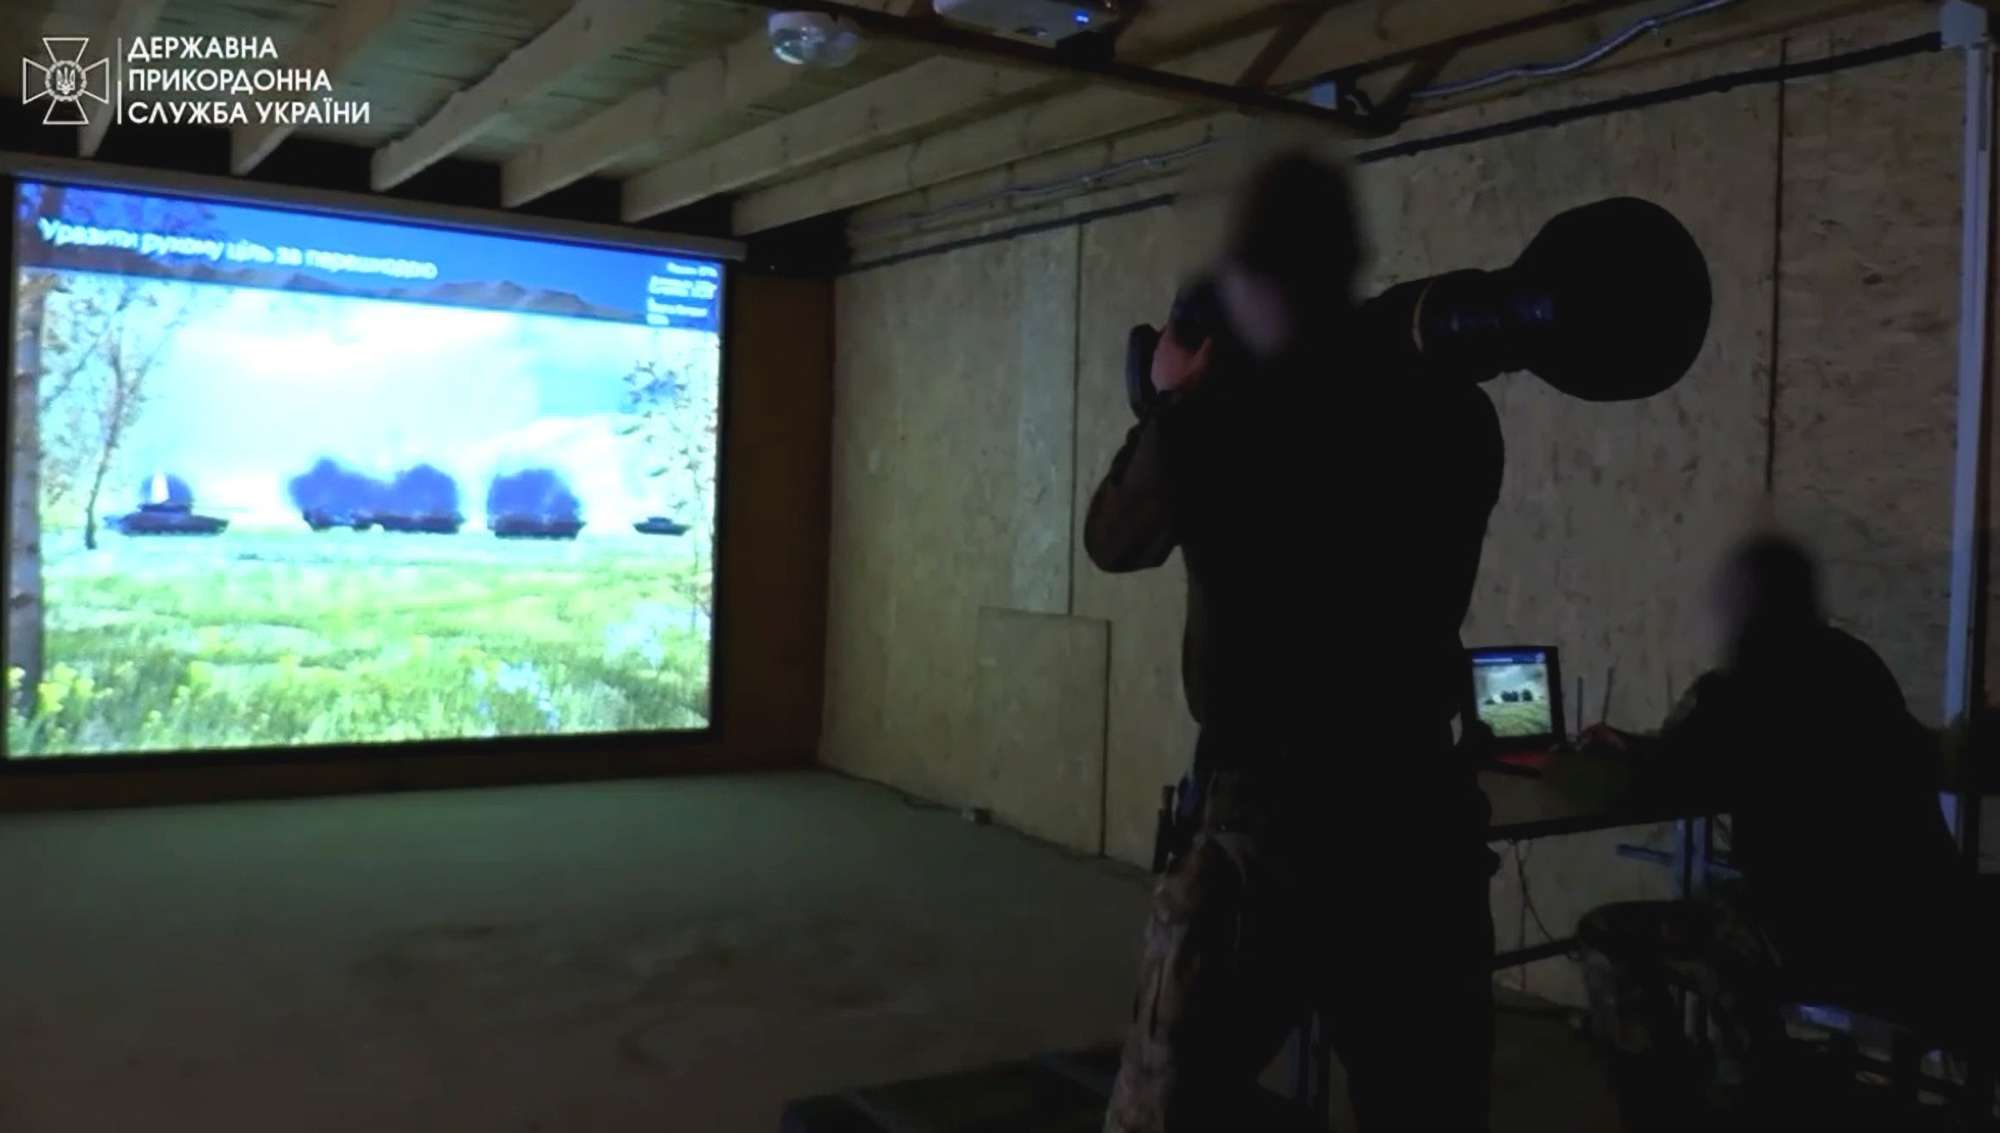 Read more about the article Ukrainian Soldier Uses VR To Learn Handling British NLAW Portable ATGM System